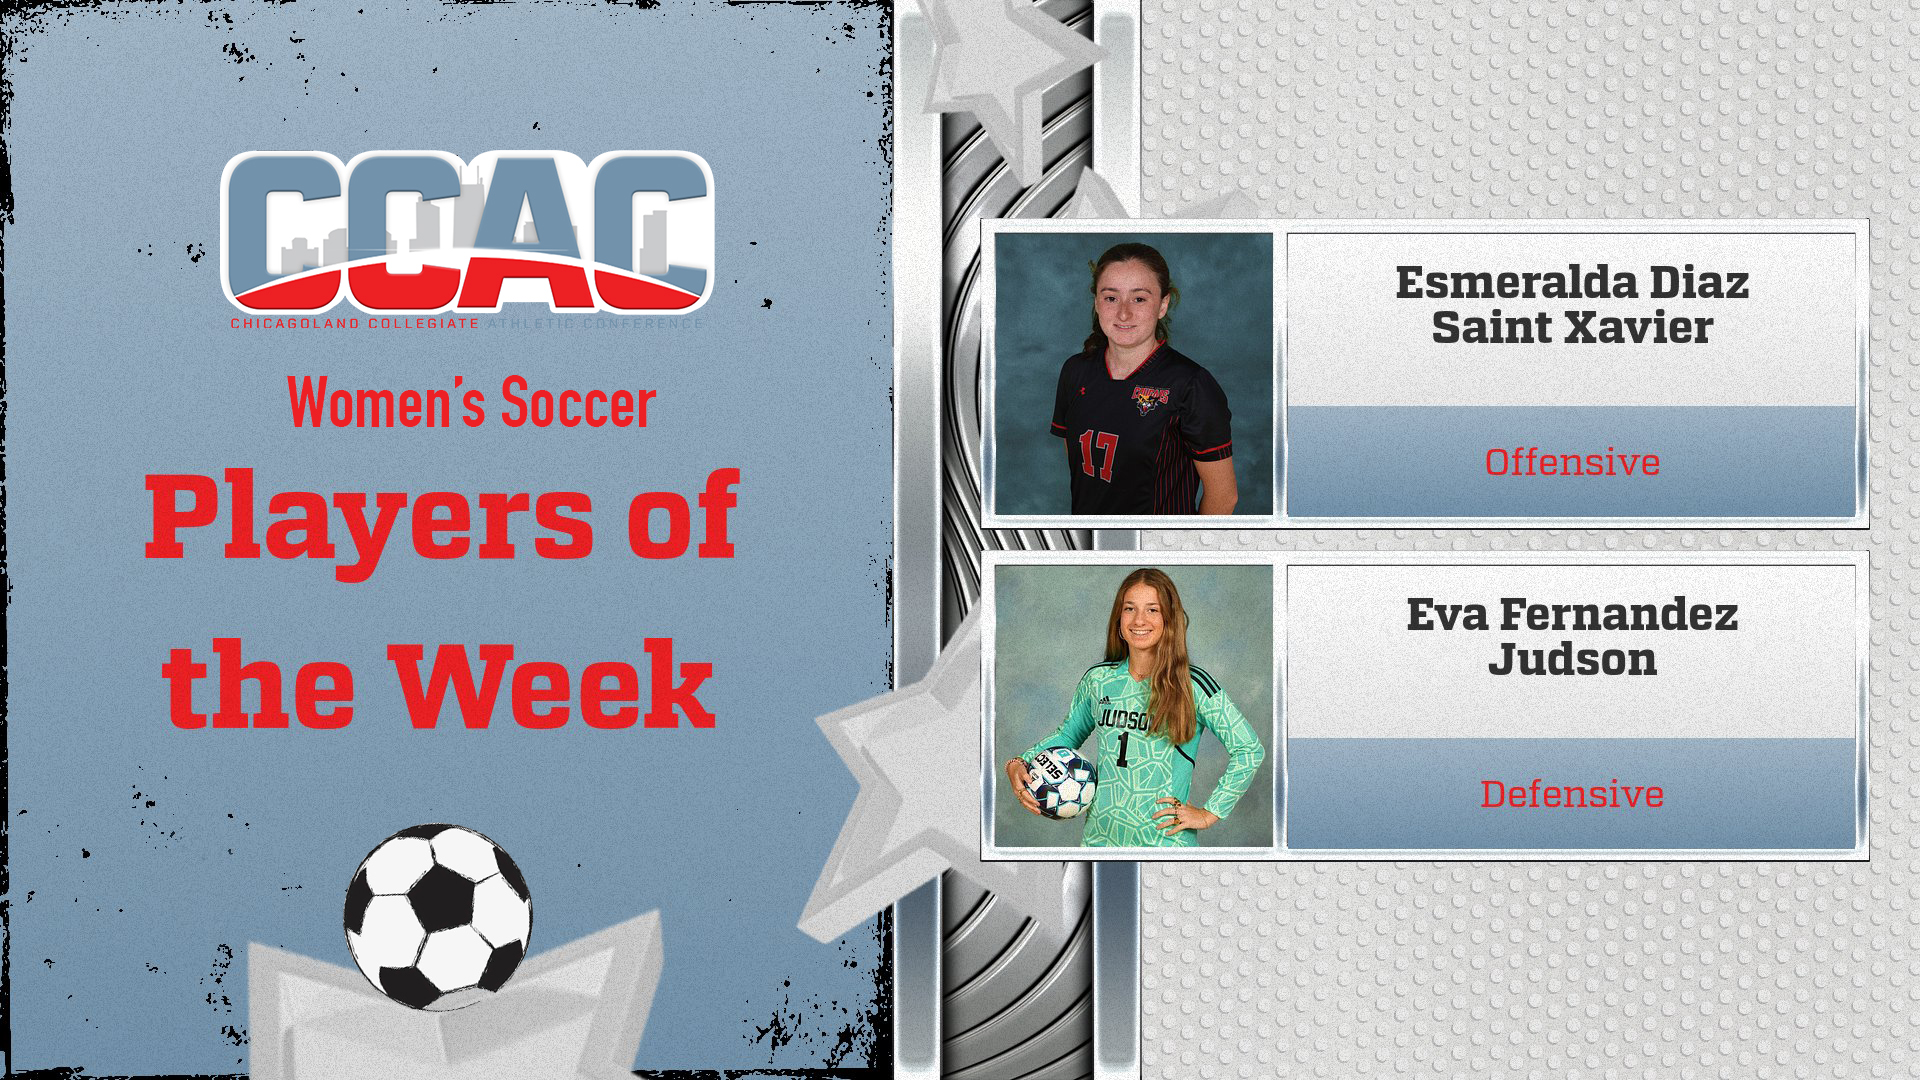 Two Wins For SXU, JU Land Weekly Women's Soccer Honors For Diaz, Fernandez